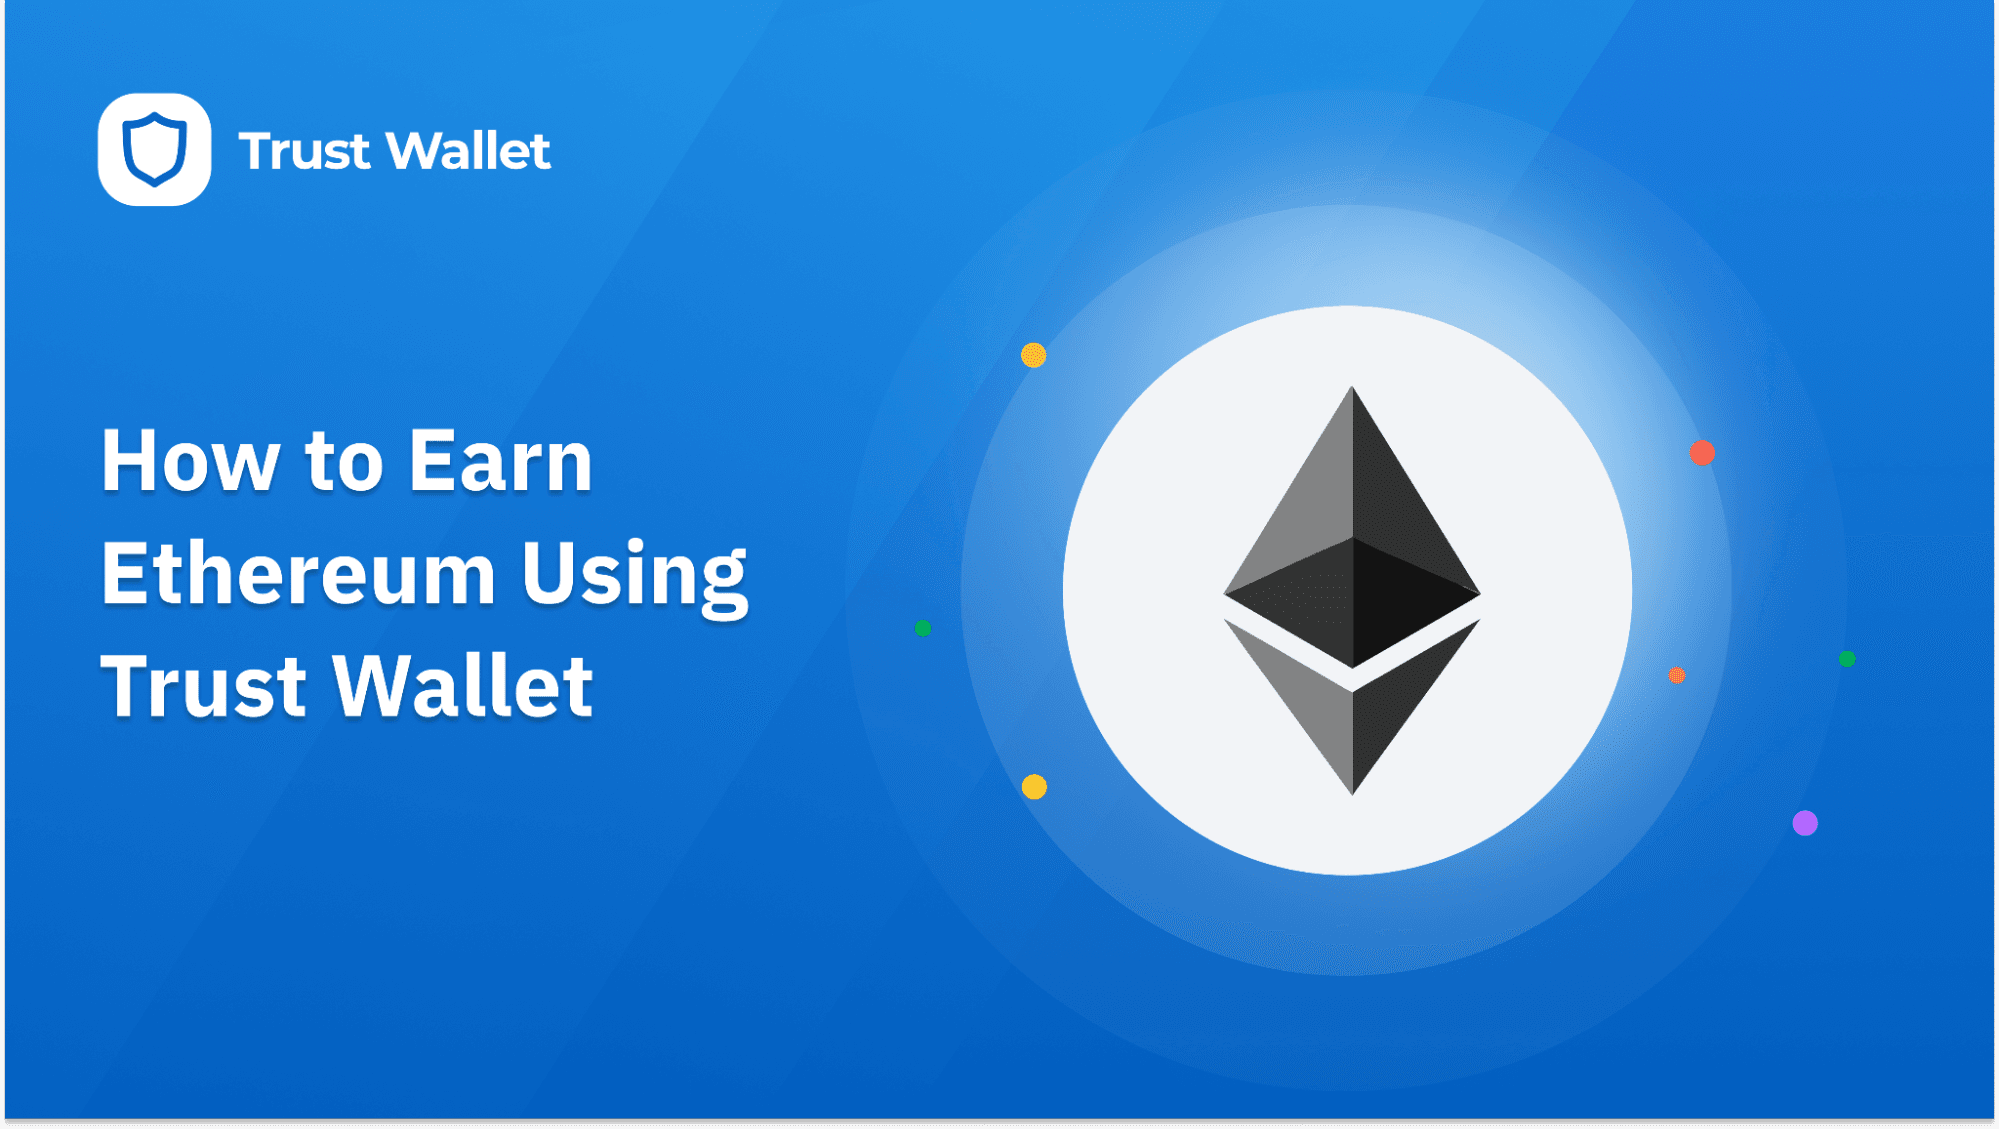 How to Earn Ethereum Using Trust Wallet